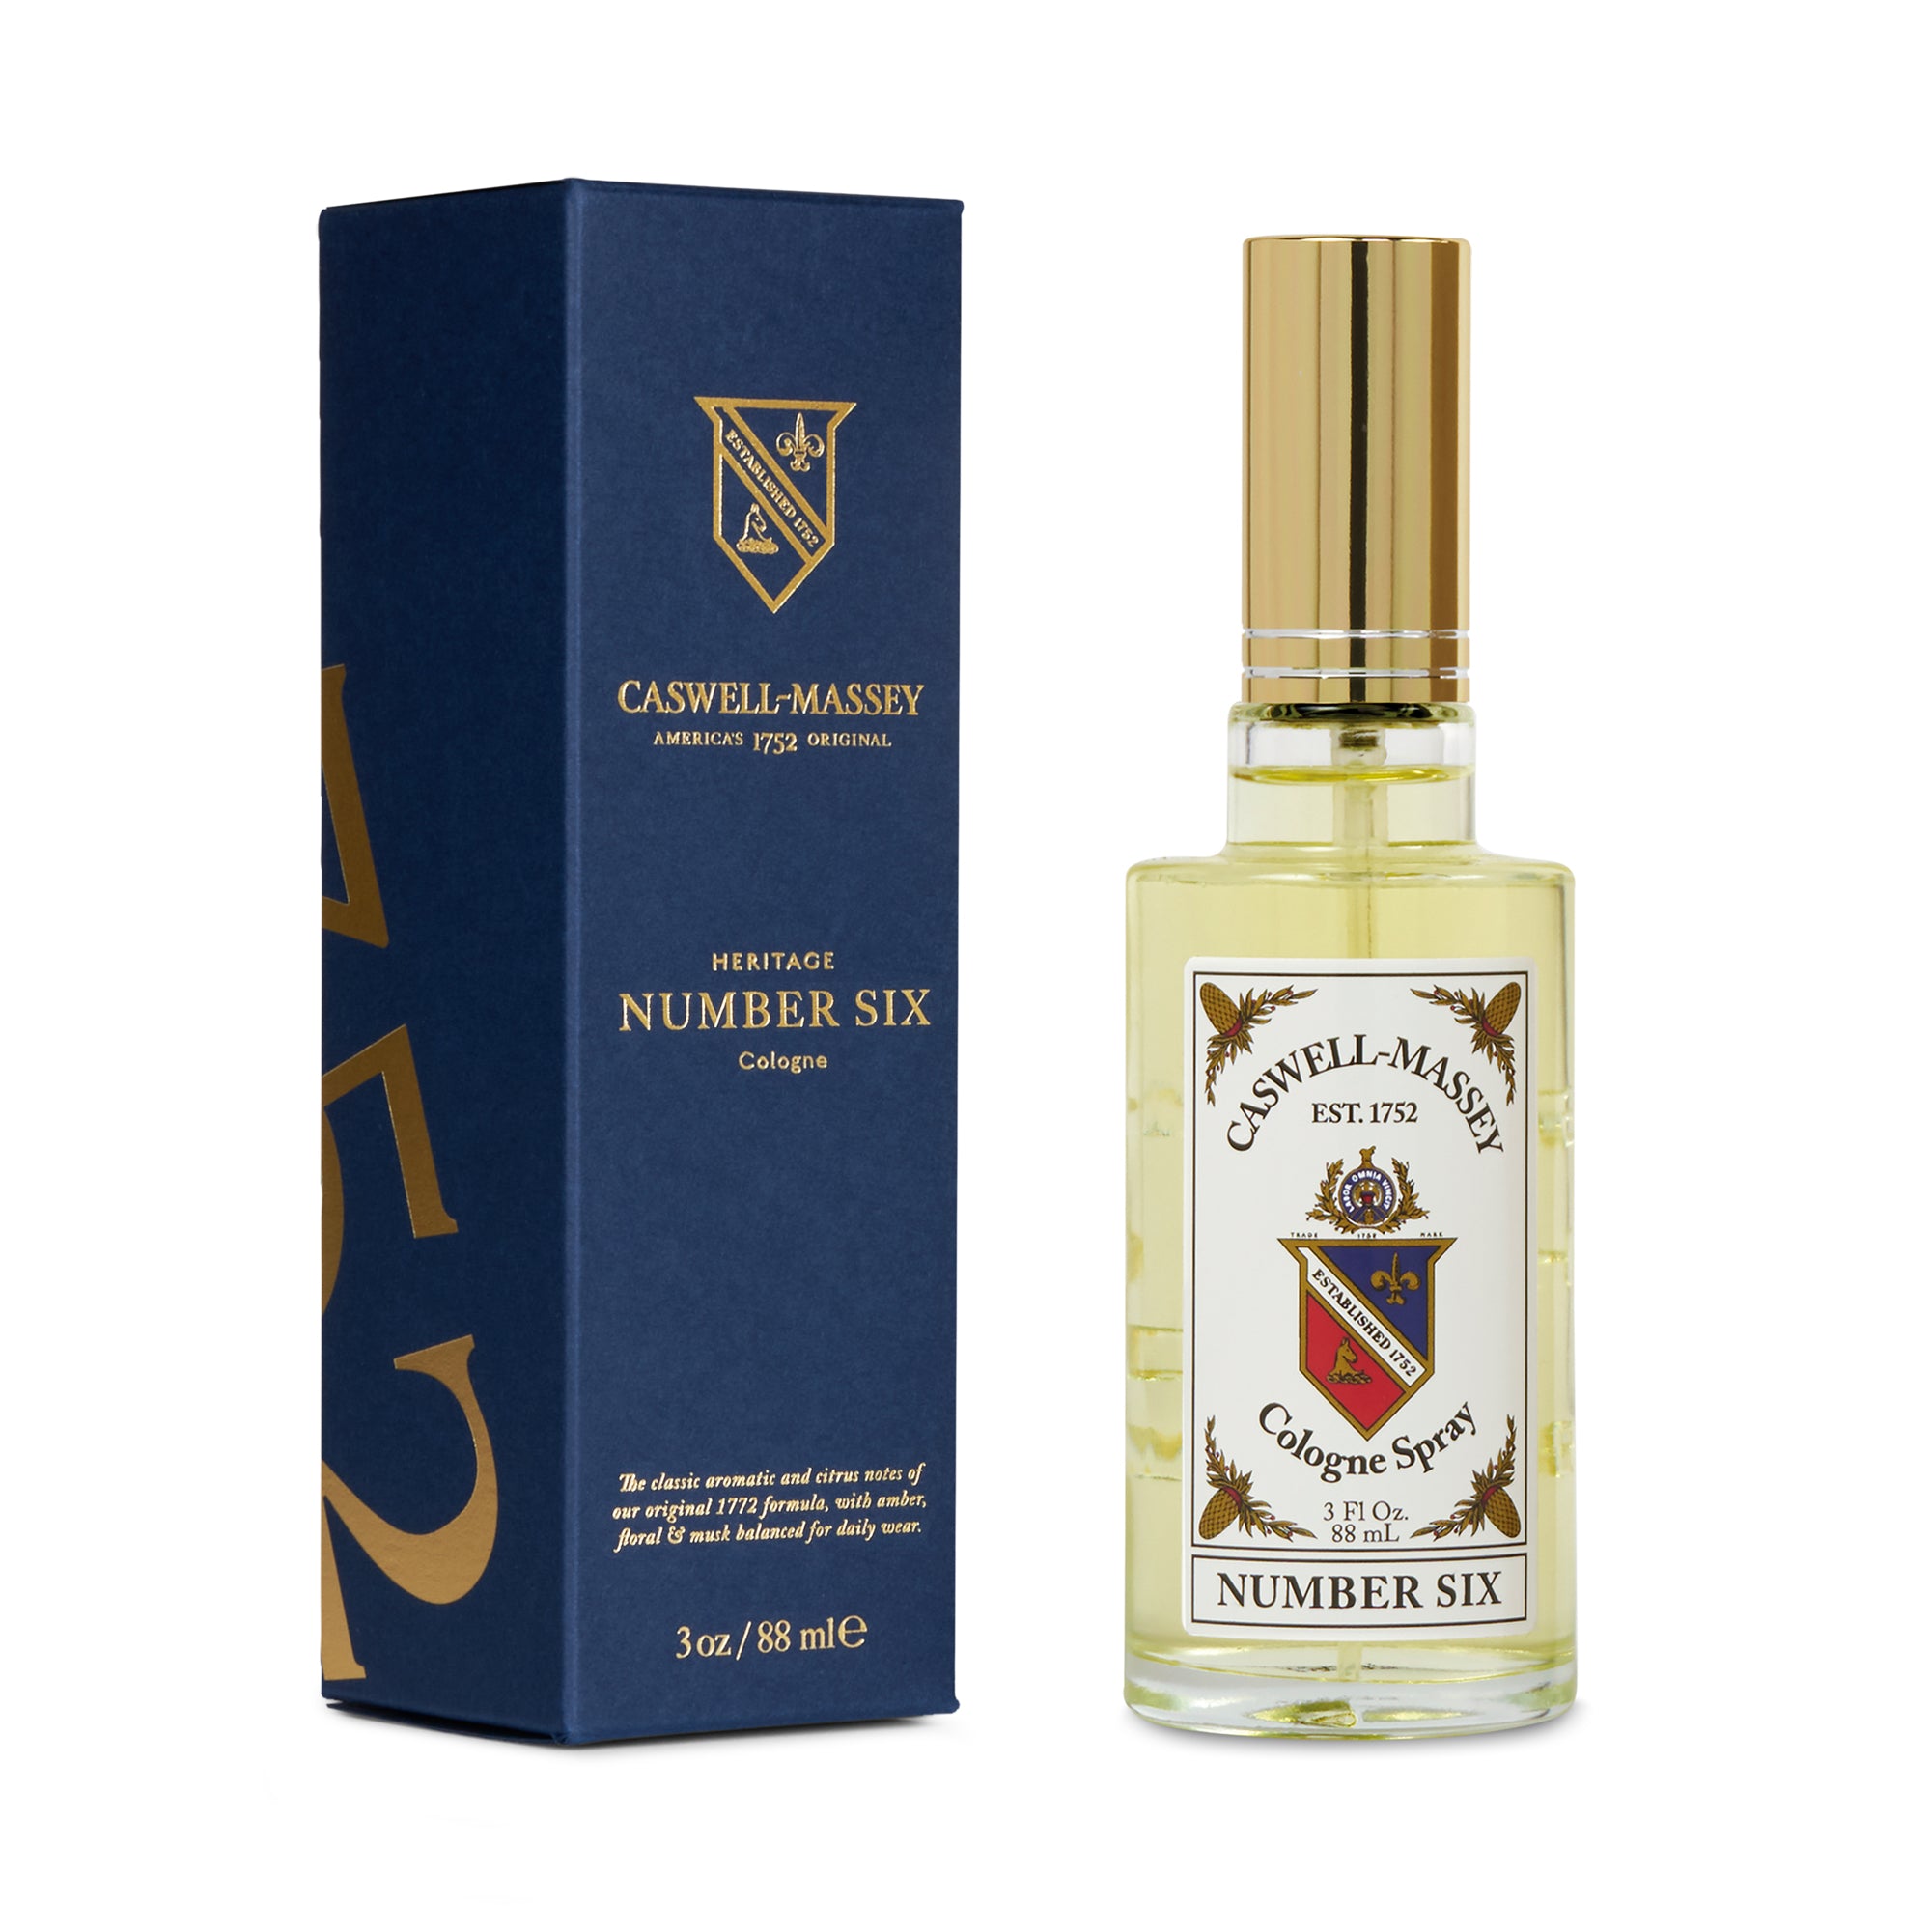 Caswell-Massey Number Six Cologne, 88ml, shown with navy blue box